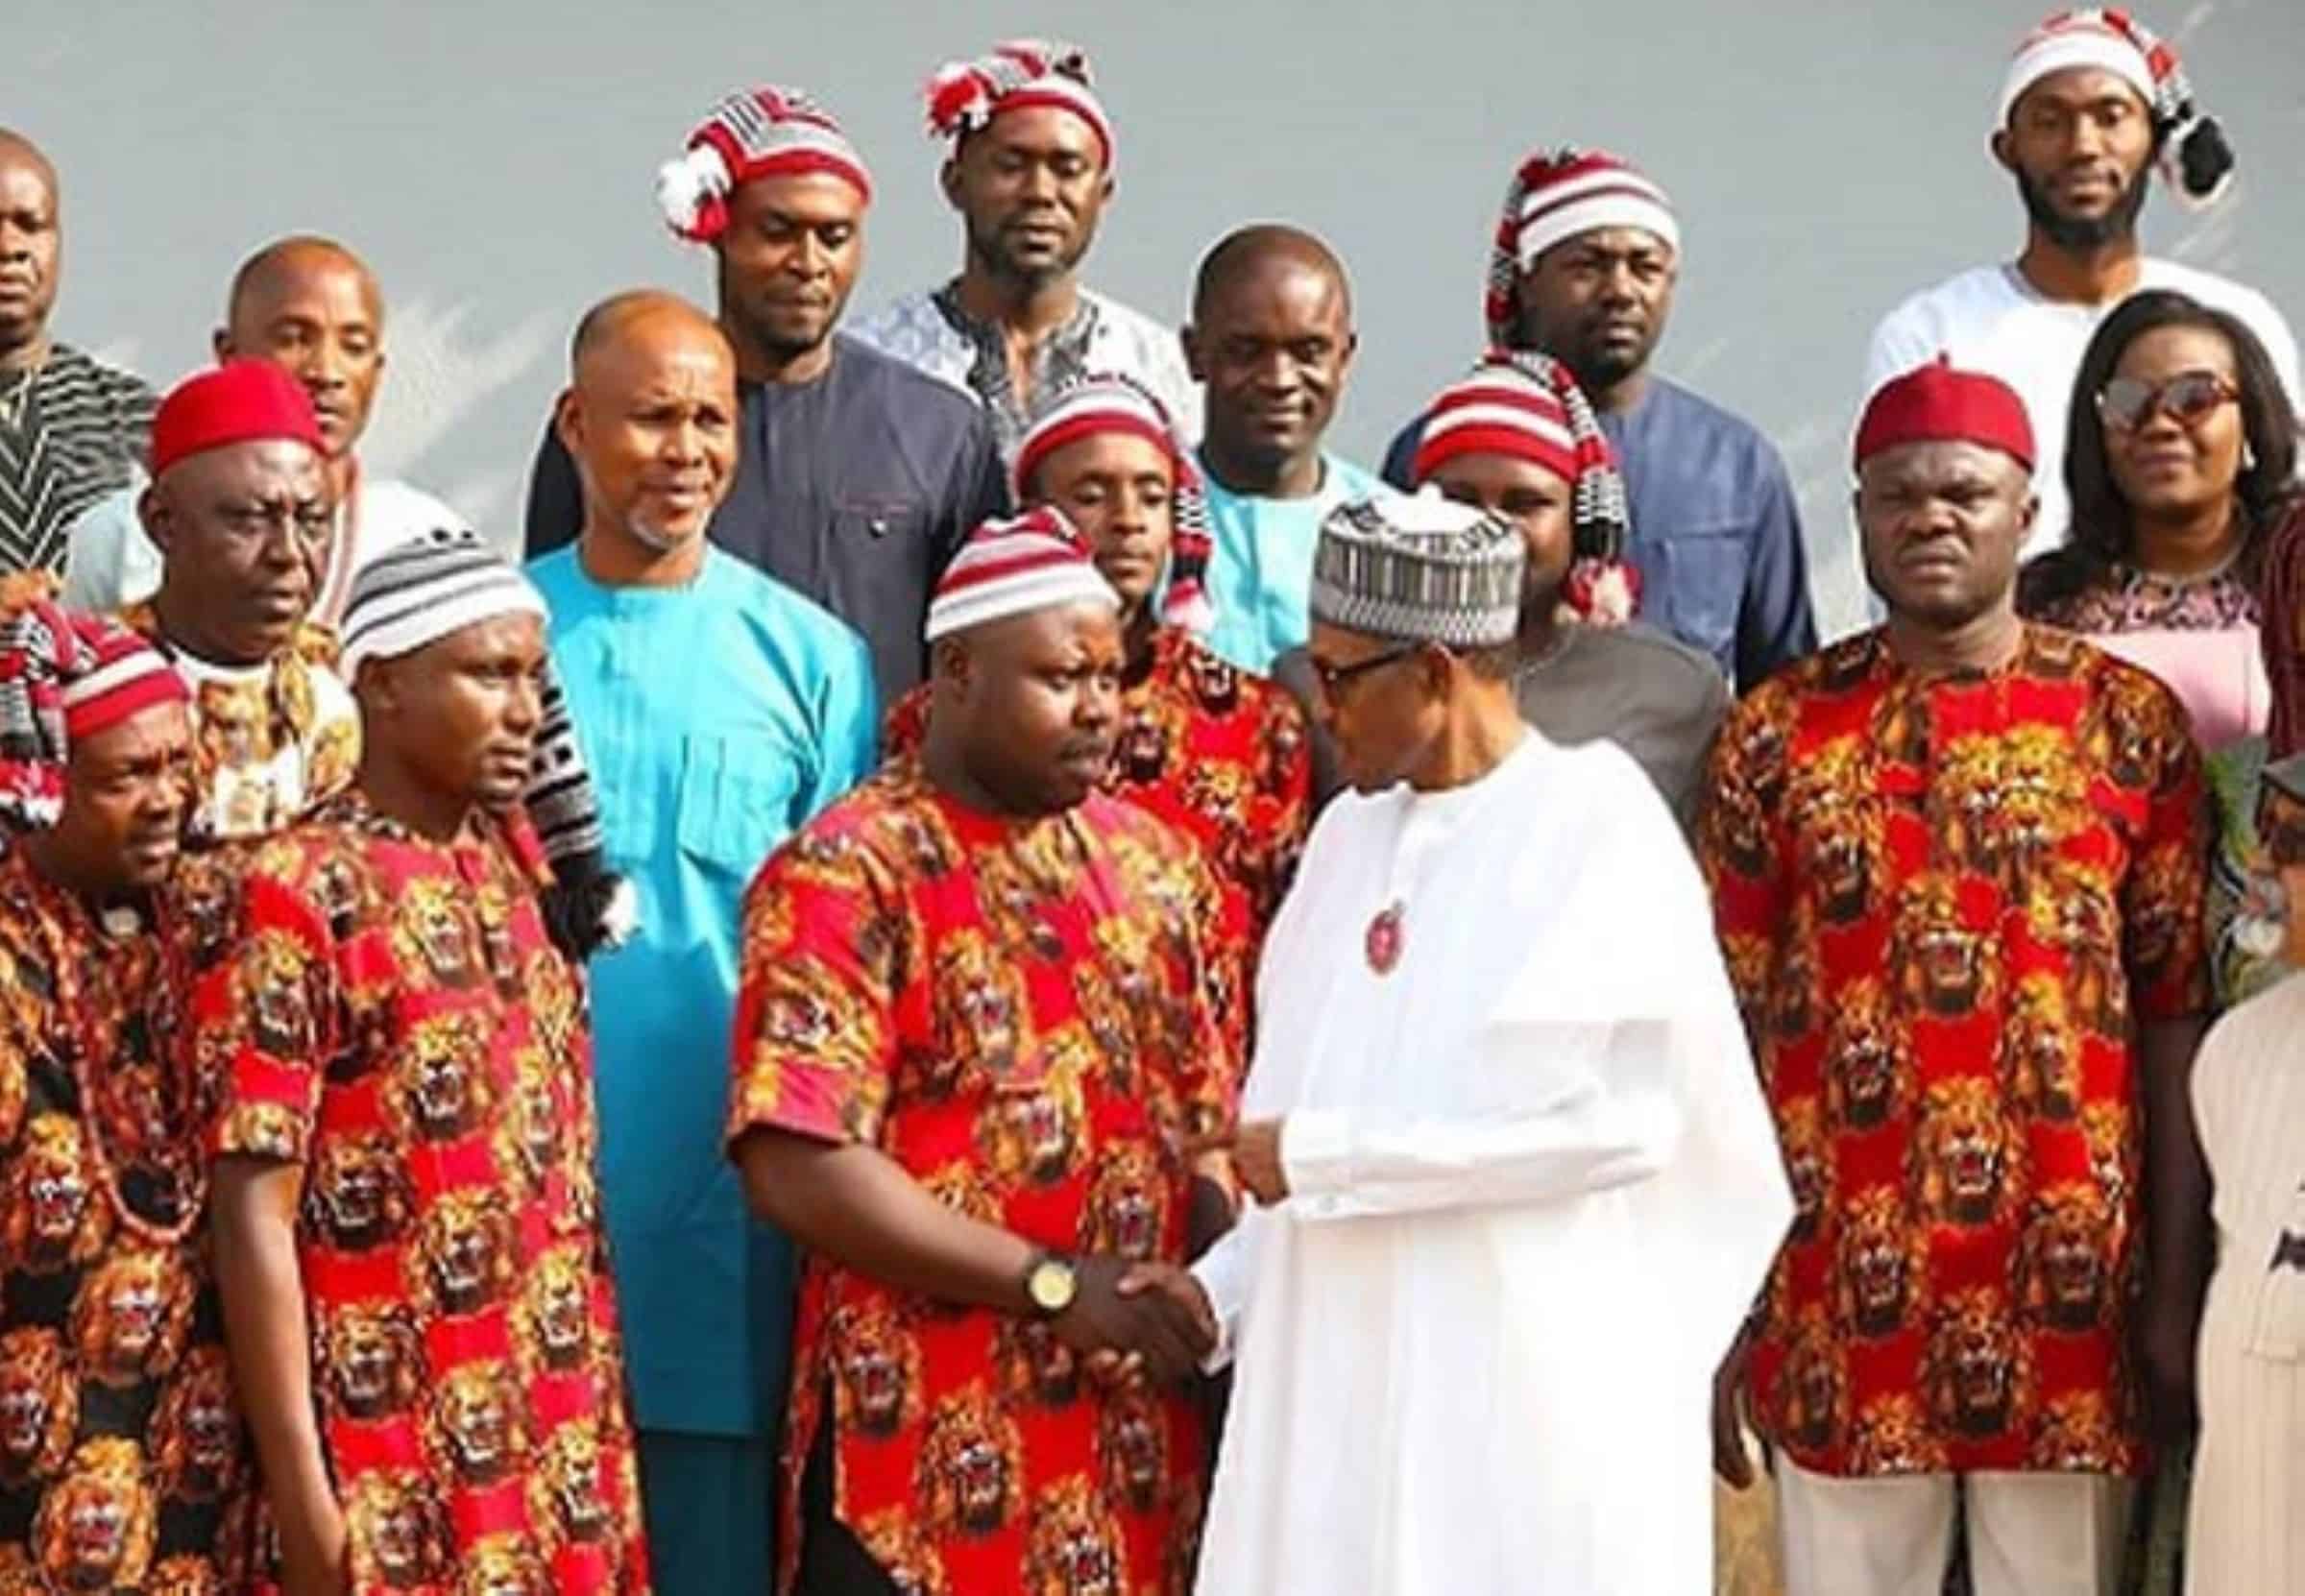 Ohanaeze told Buhari the presidential candidate they want